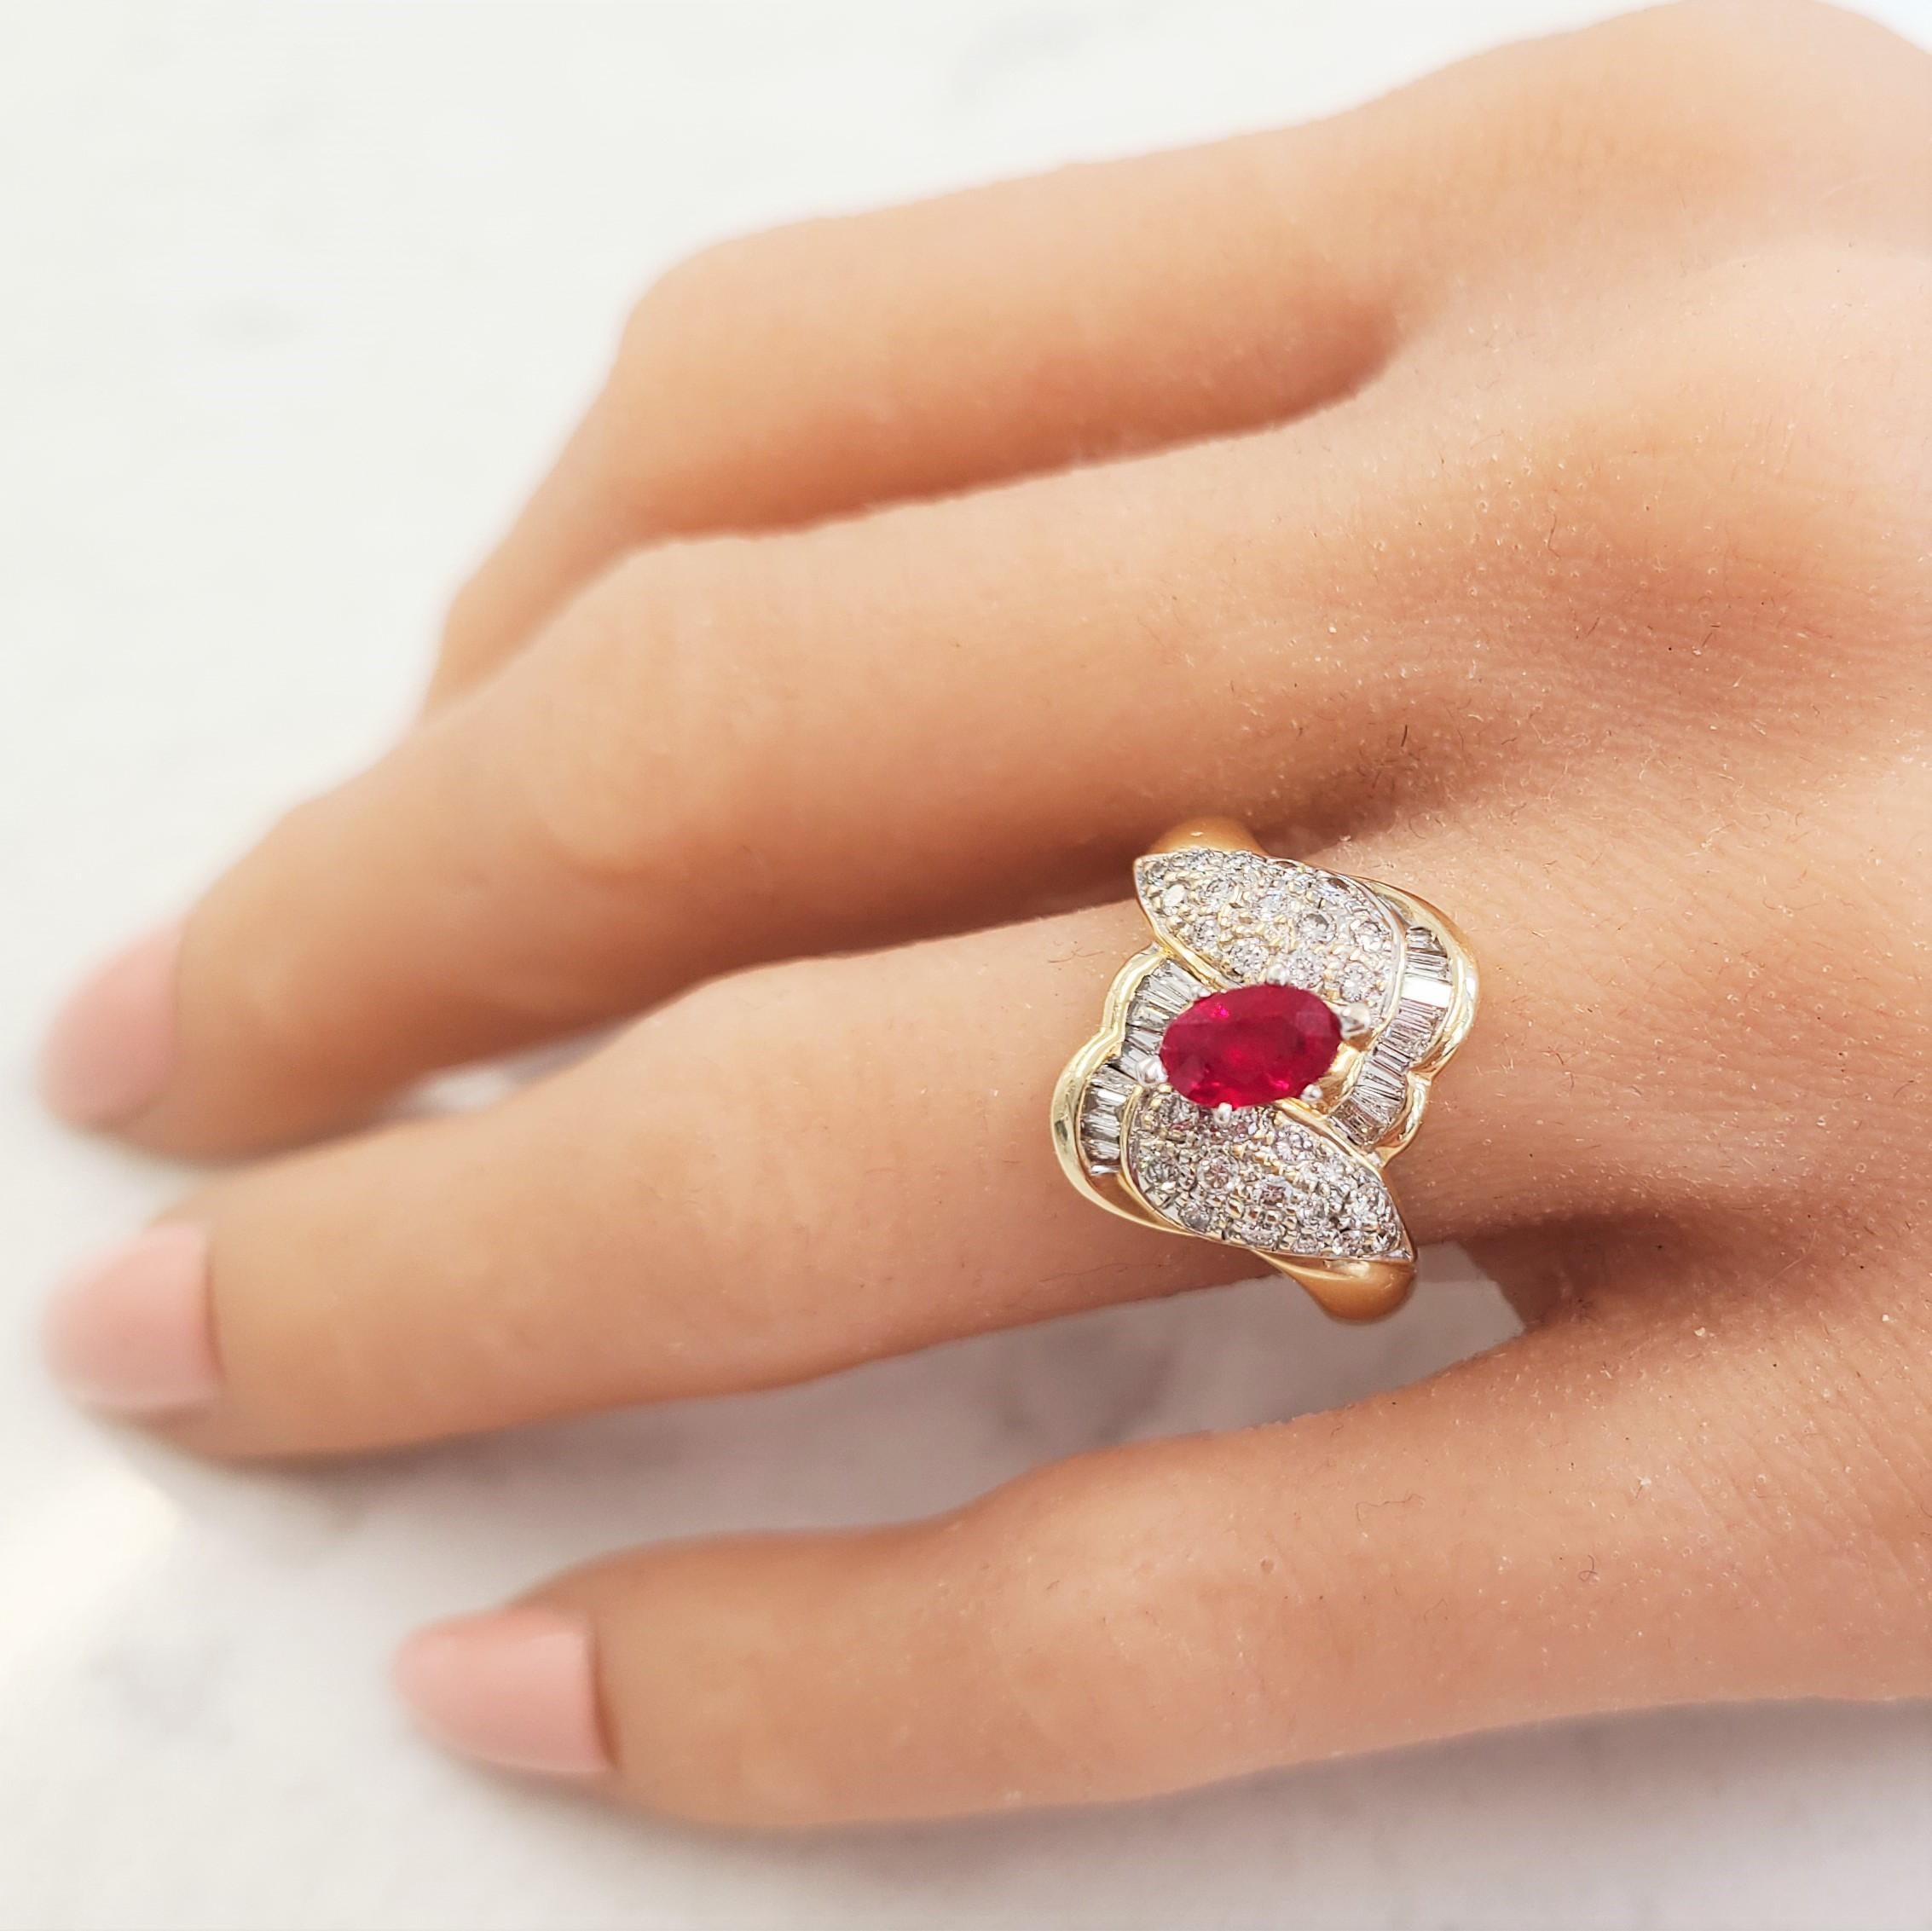 This gorgeous brightly polished 14 karat yellow gold cocktail engagement anniversary ring features a stunning combination of ruby and diamonds, creating a spectacular showing of vibrancy and fire. A center-set 0.50 carats of ruby is set into this